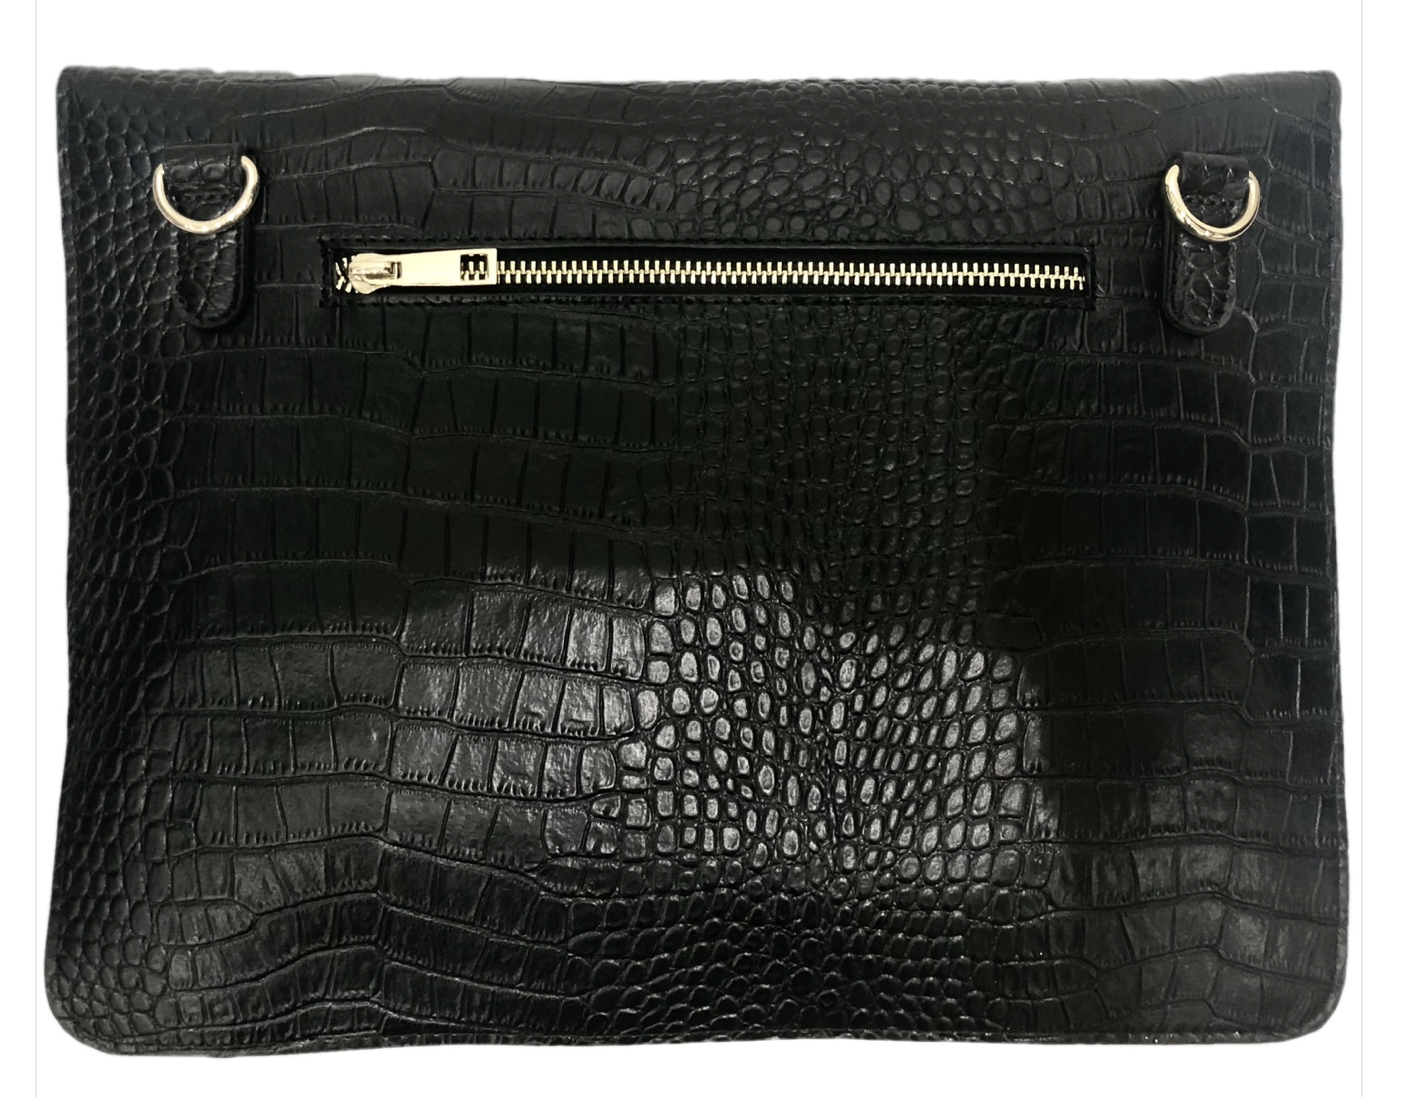 Amma Jo Wild Thing Embossed Leather Envelope Clutch